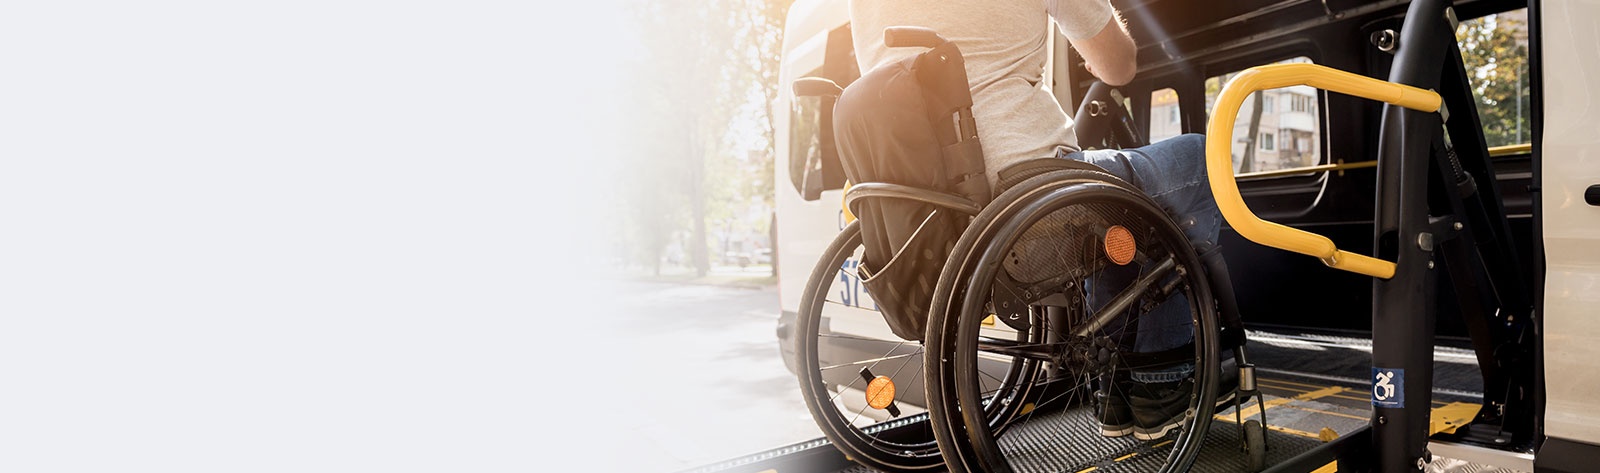 WHEELCHAIR ACCESSIBLE TRANSPORTATION SERVICES